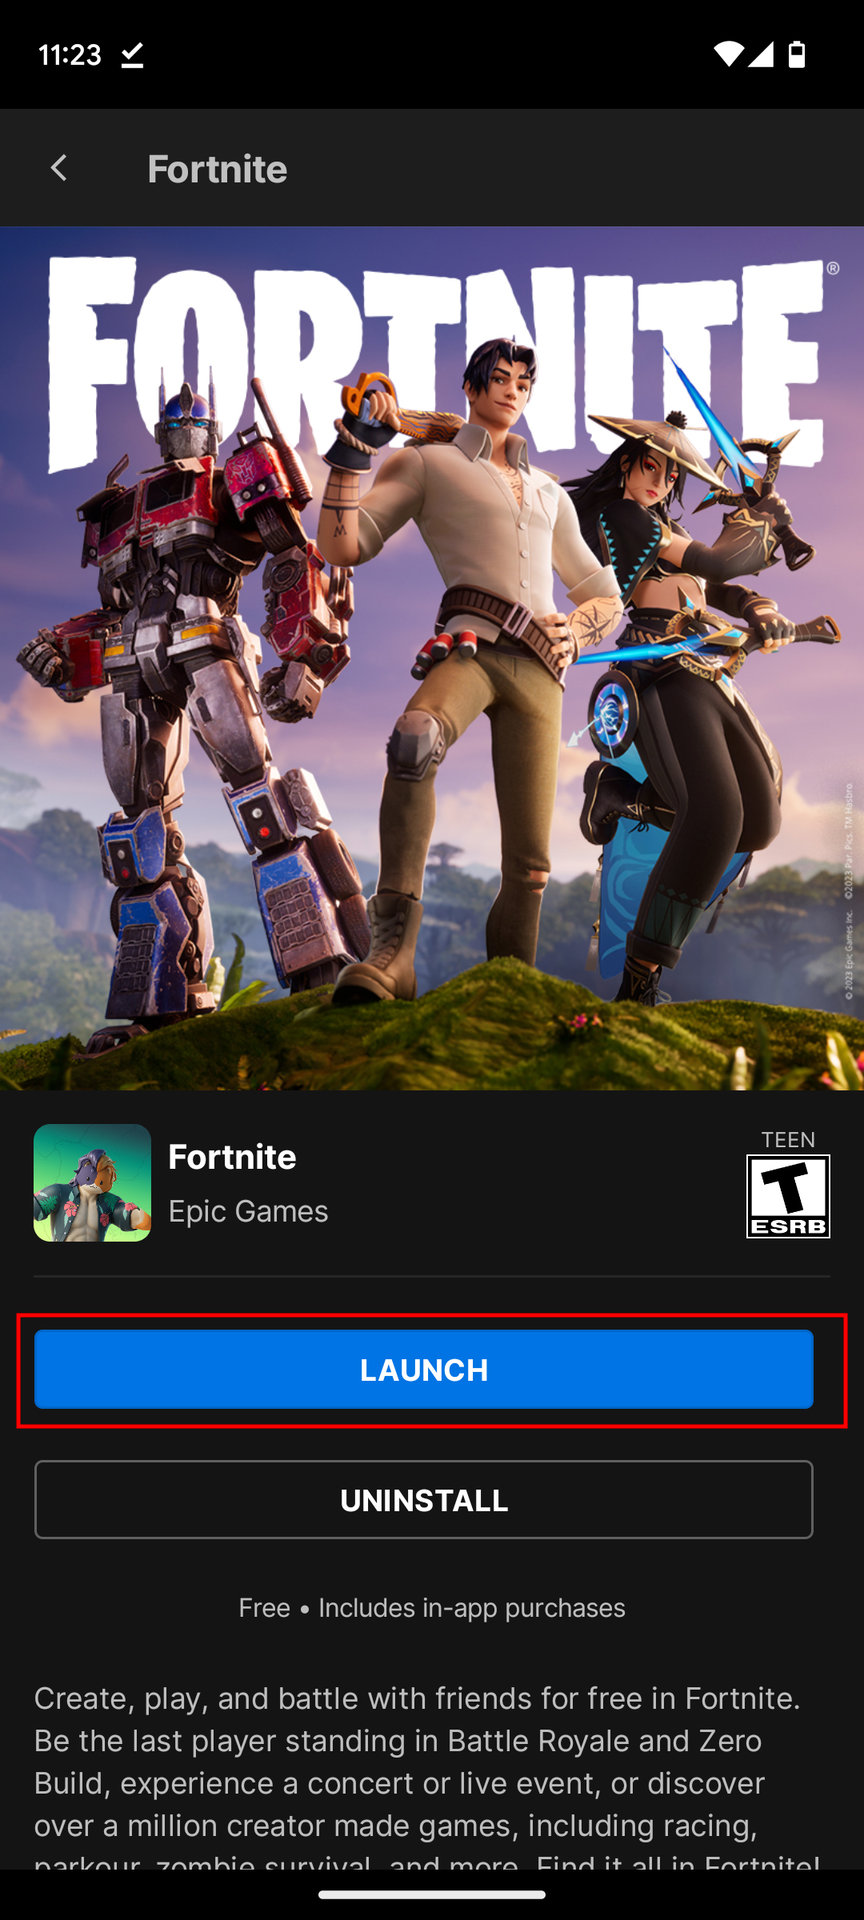 Install Fortnite using the Epic Games Launcher - Fortnite Support